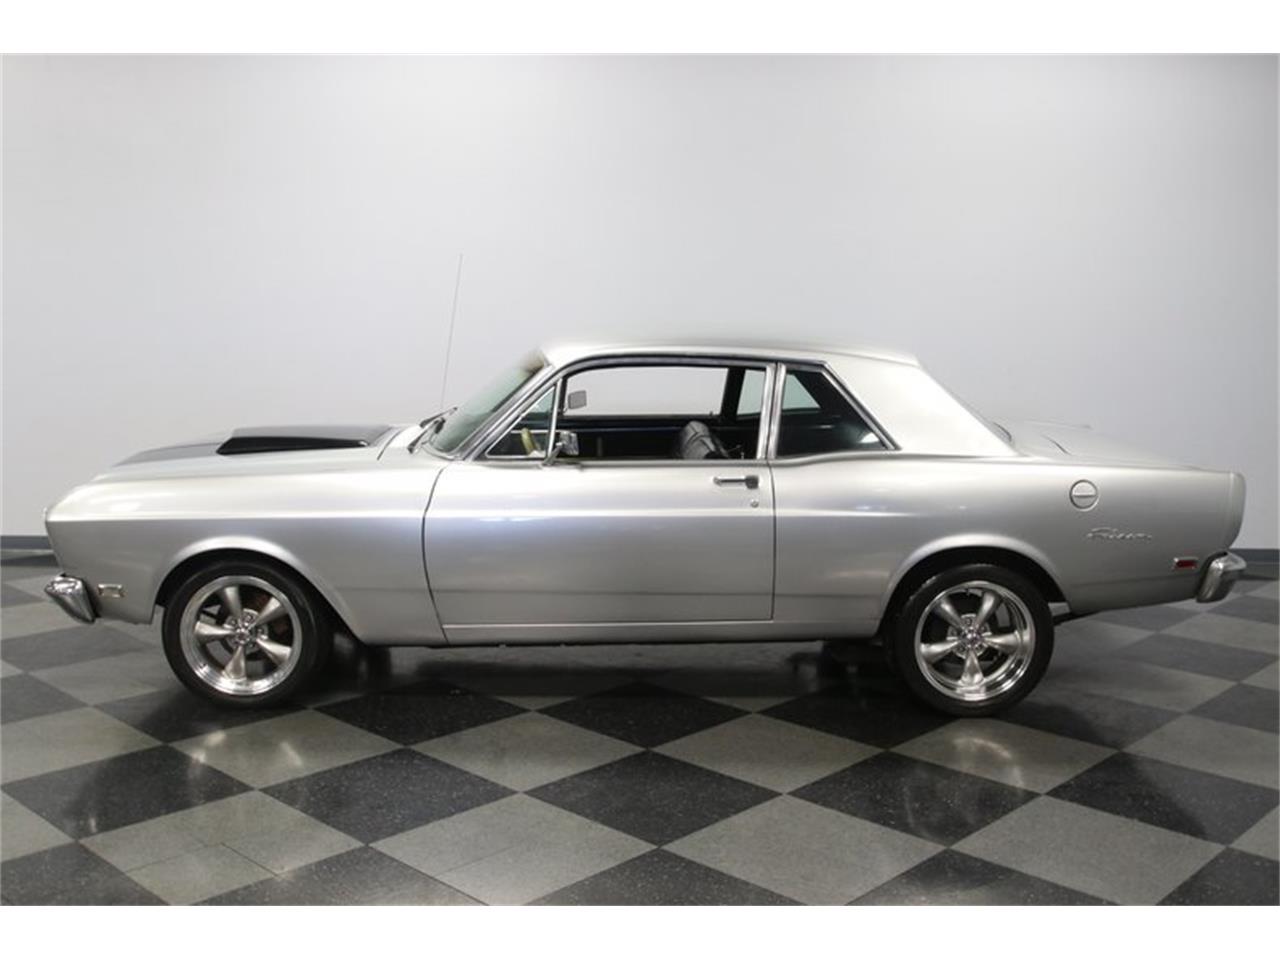 1969 ford falcon for sale classiccars com cc 1180192 1969 ford falcon for sale classiccars